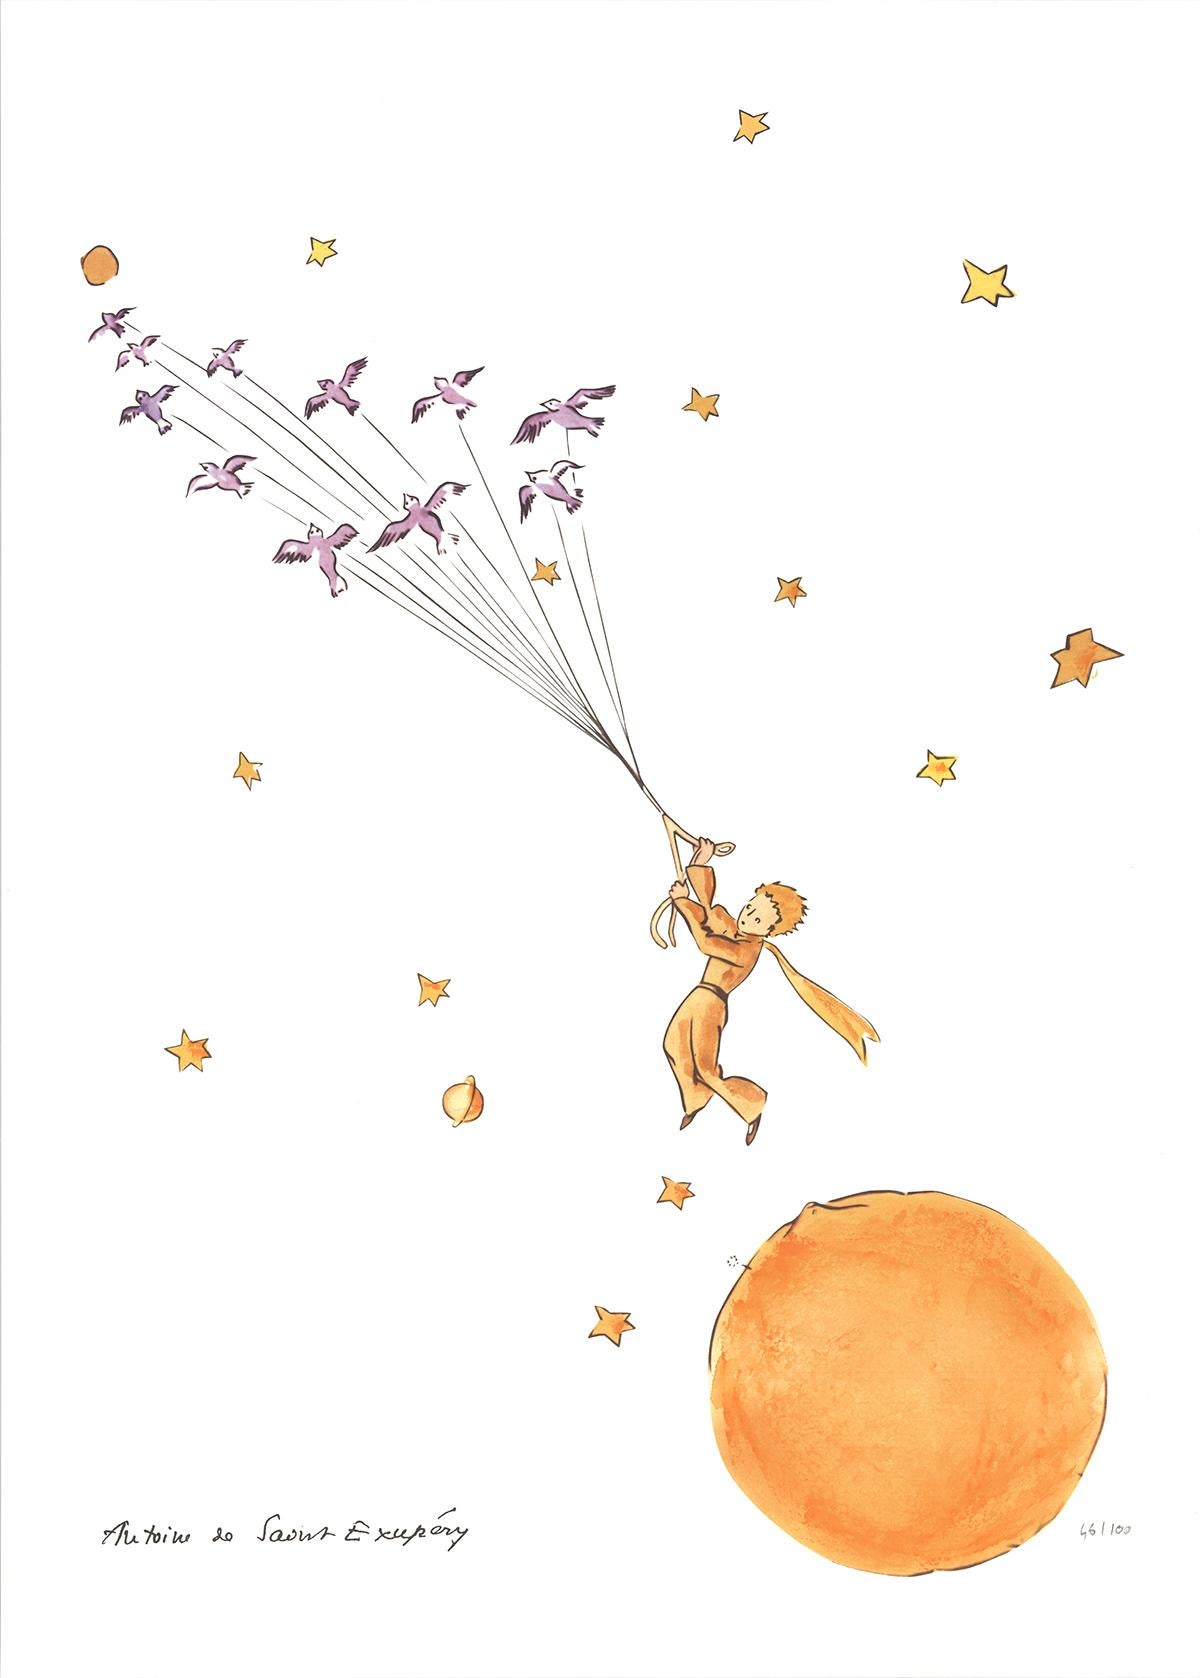 The Little Prince and the Wild Birds - Print by Antoine de saint Exupery